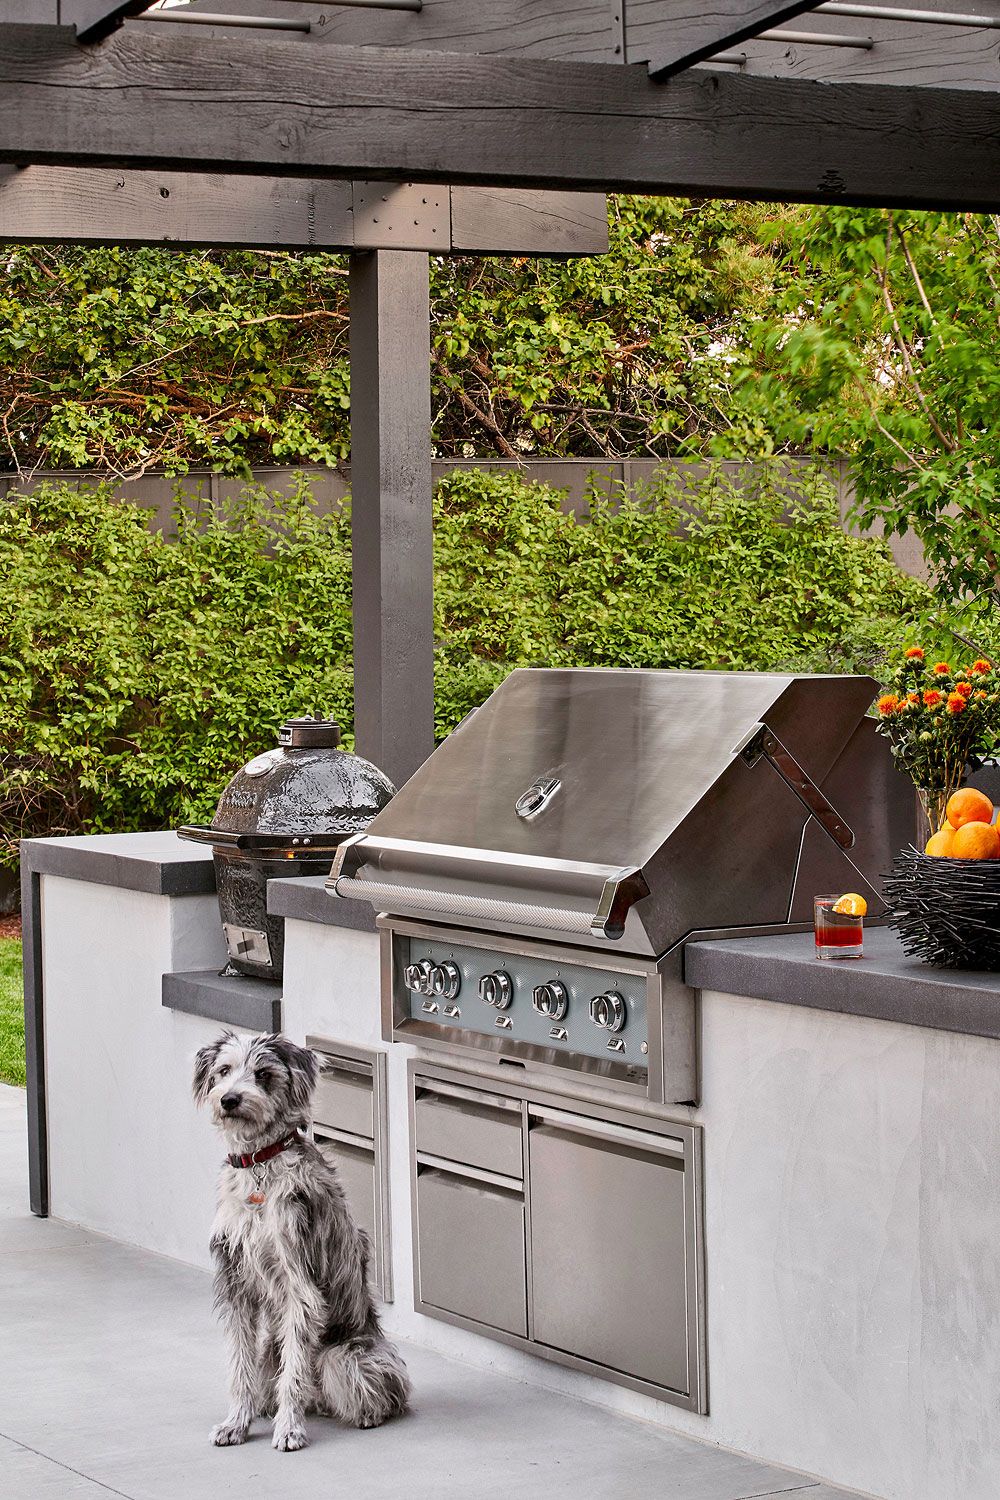 Maximizing Outdoor Spaces with Durable Cabinets